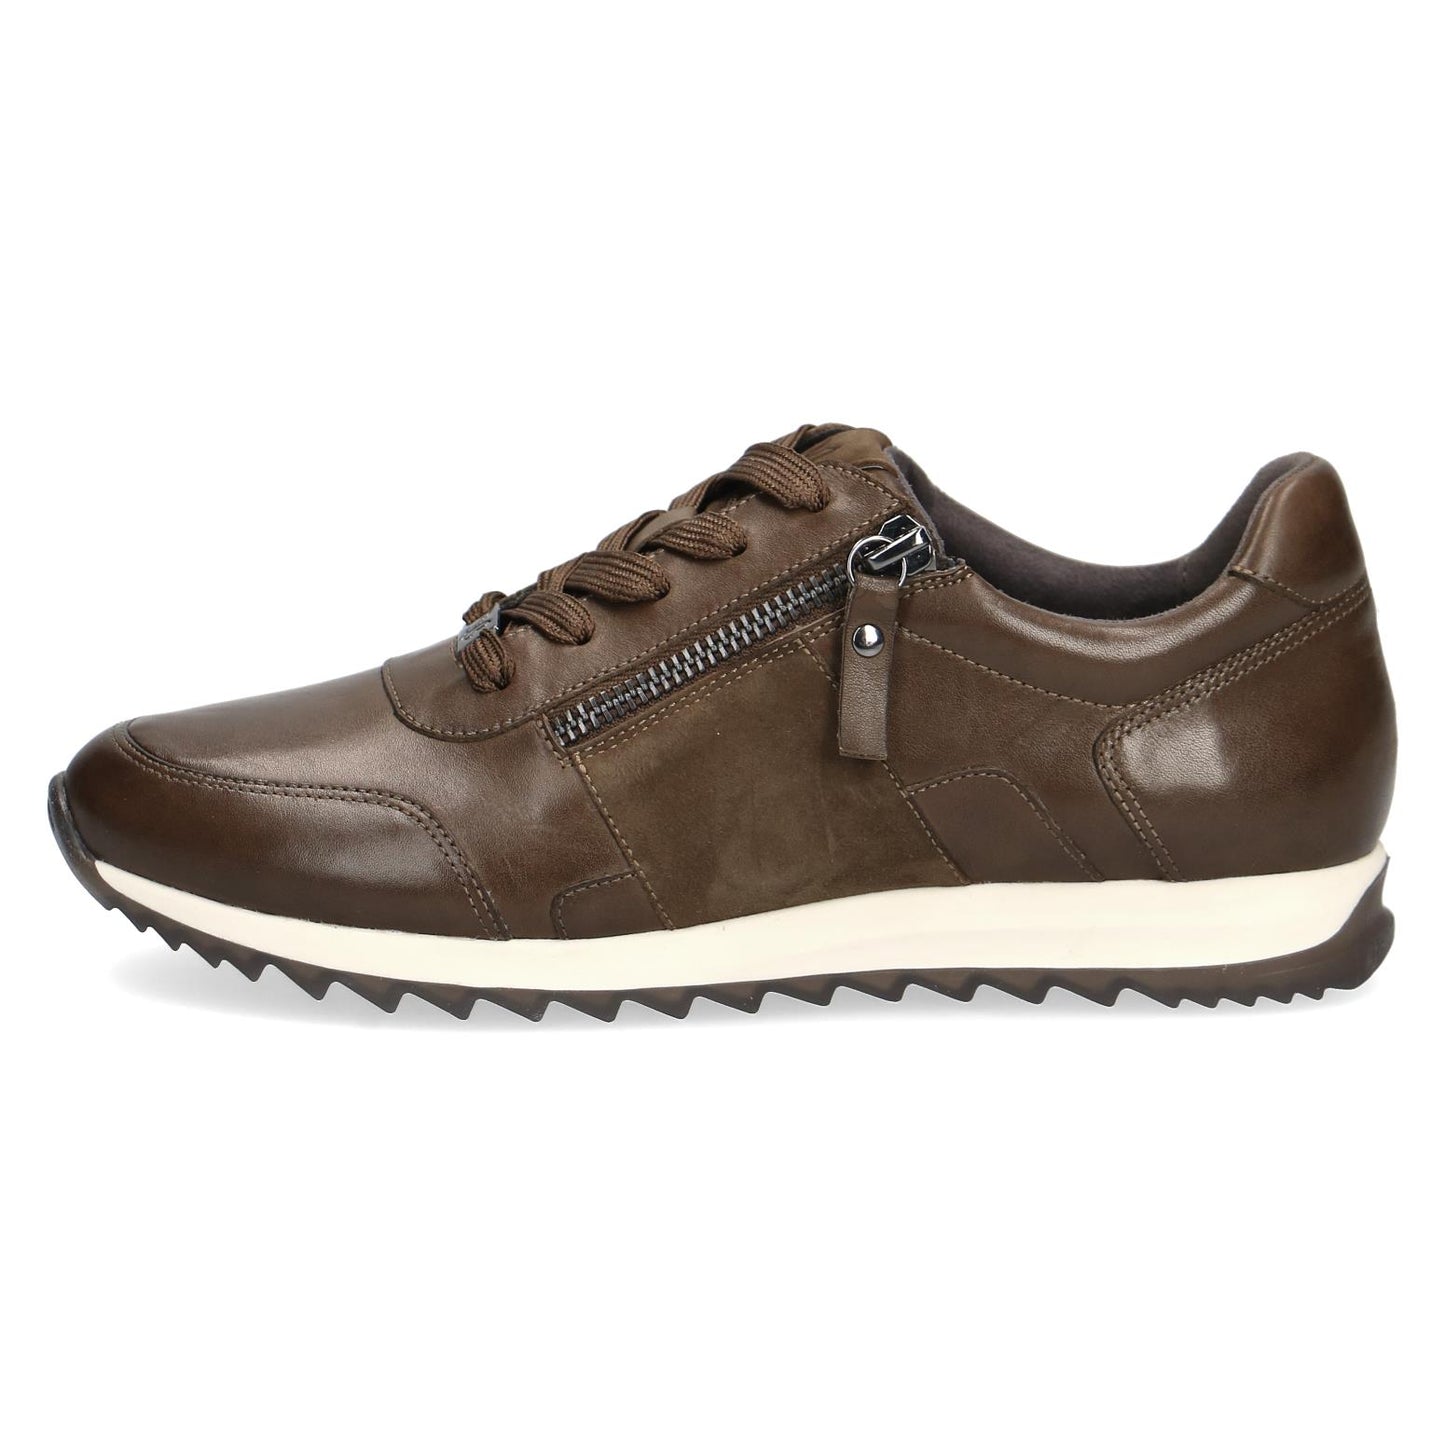 Caprice Mila 3600-29 Womens Shoes